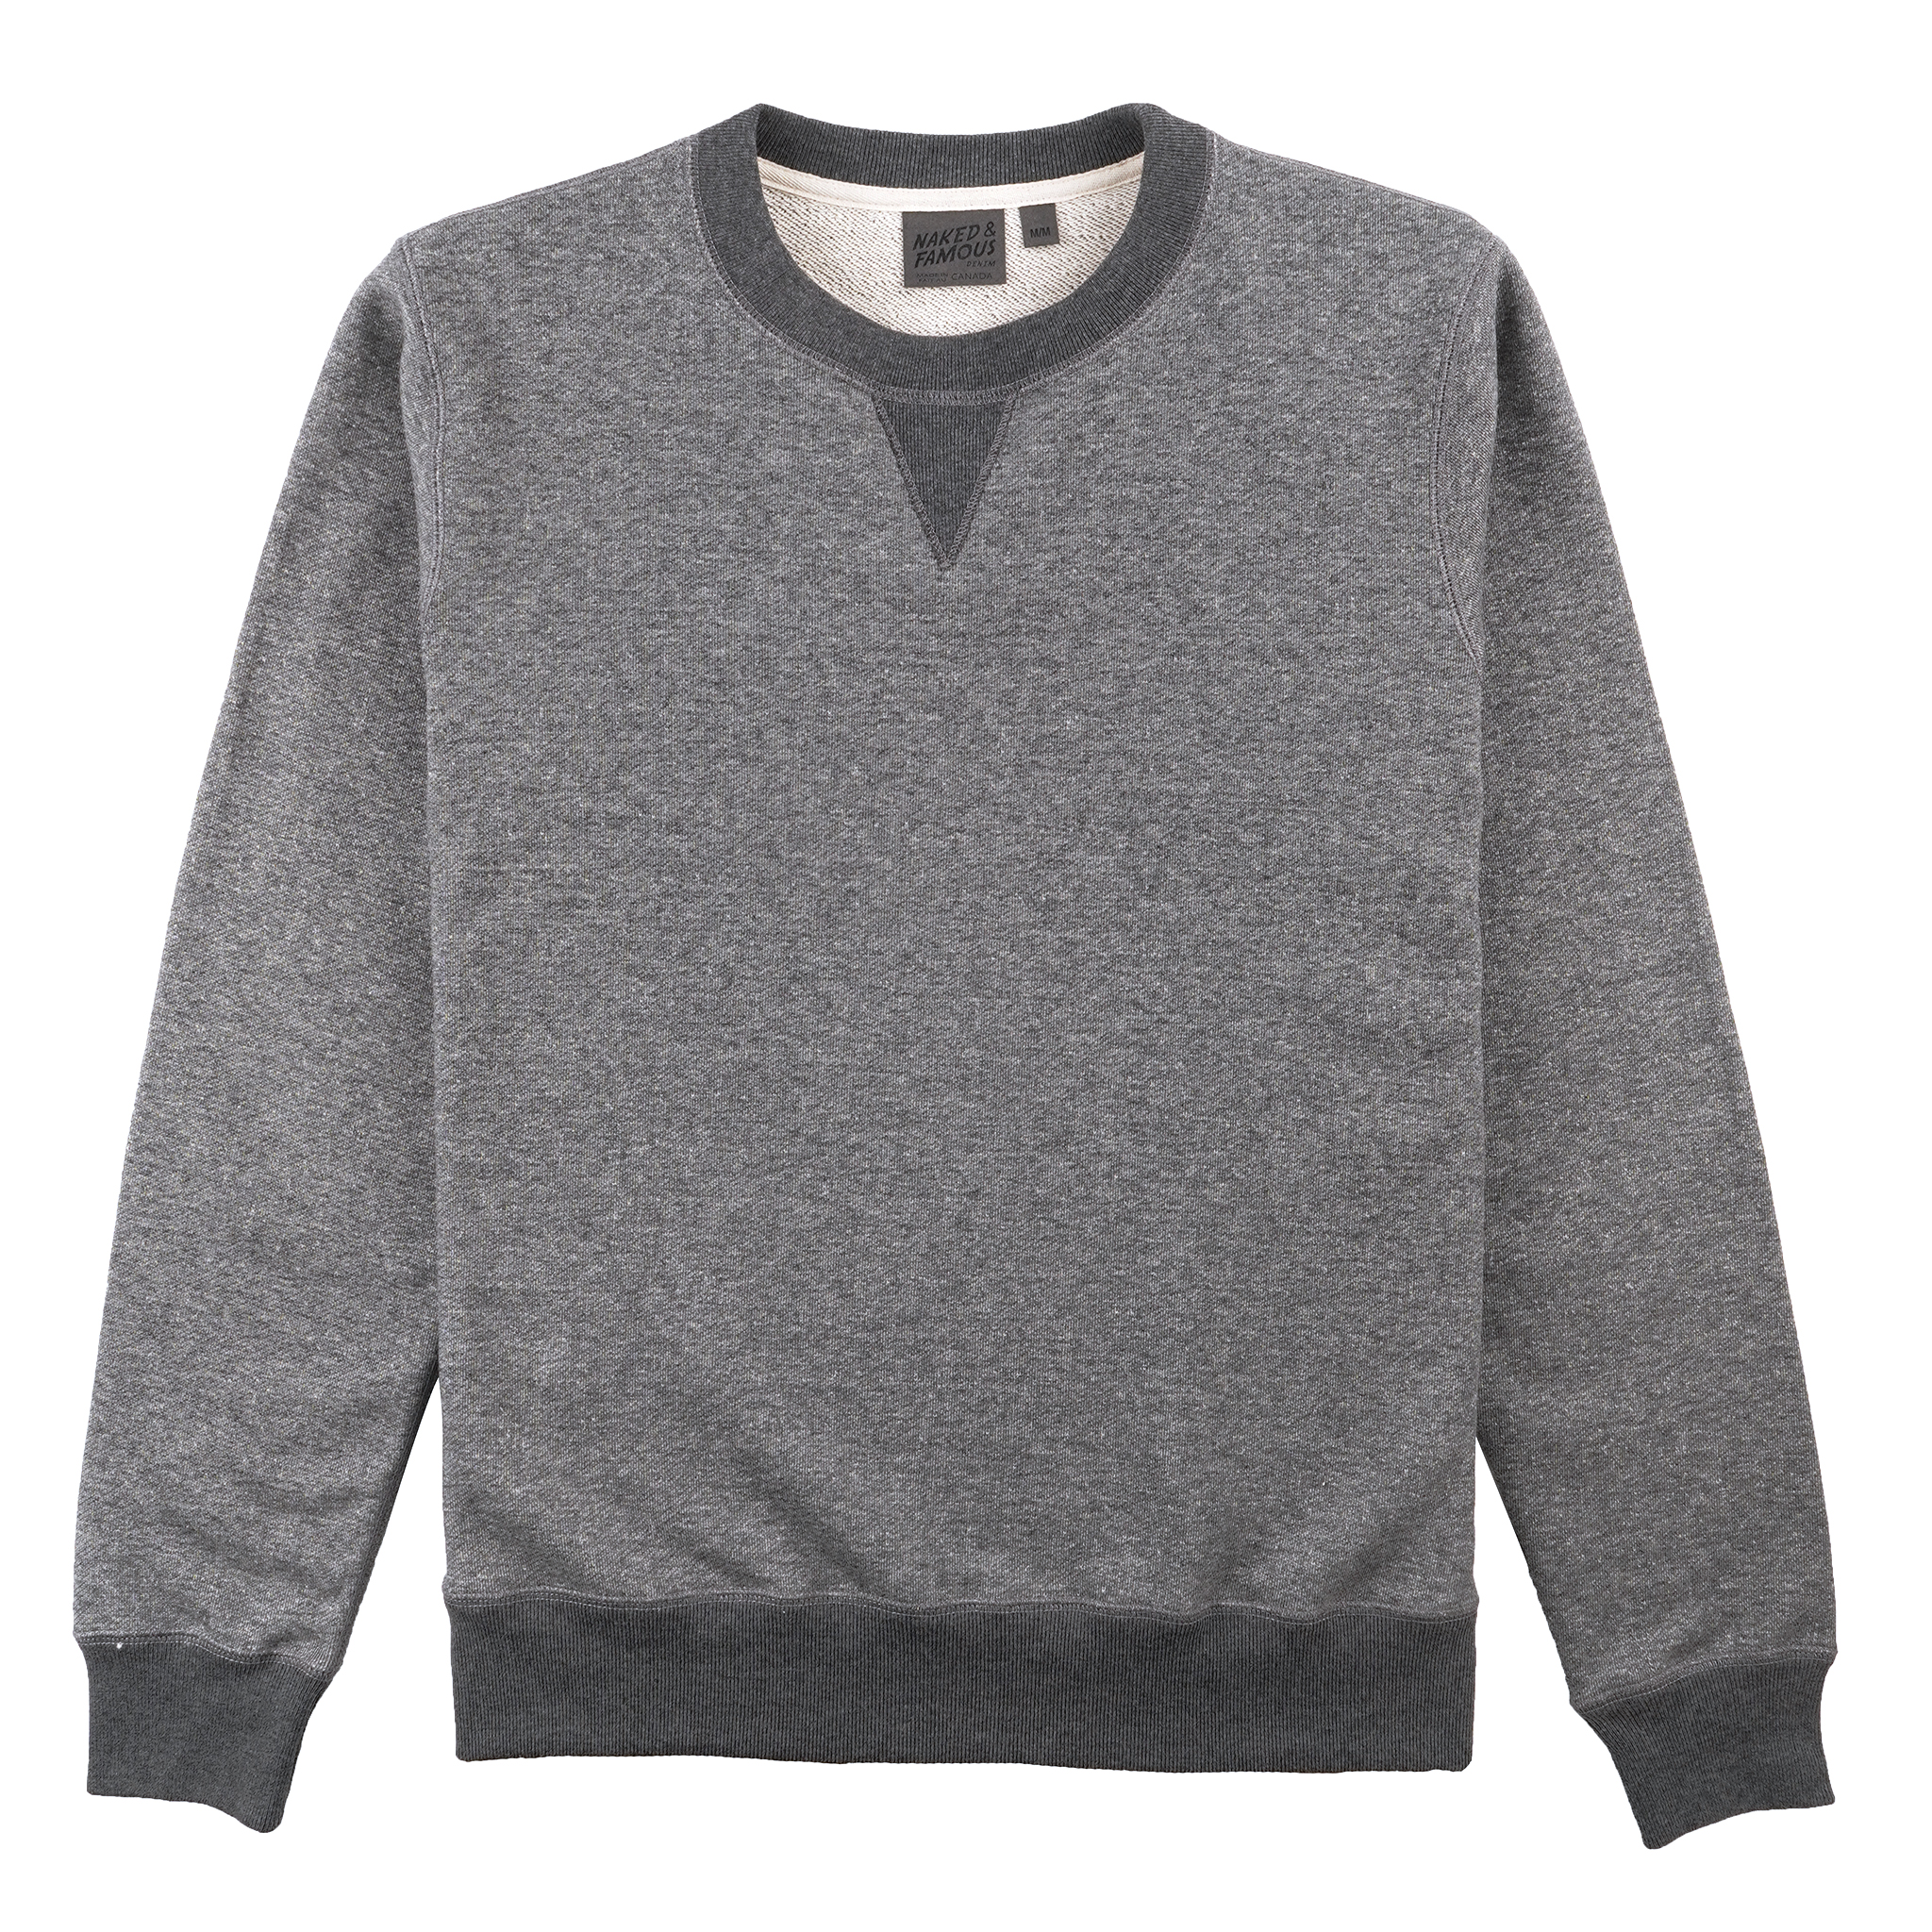  Crewneck Heavyweight Terry Charcoal - front 